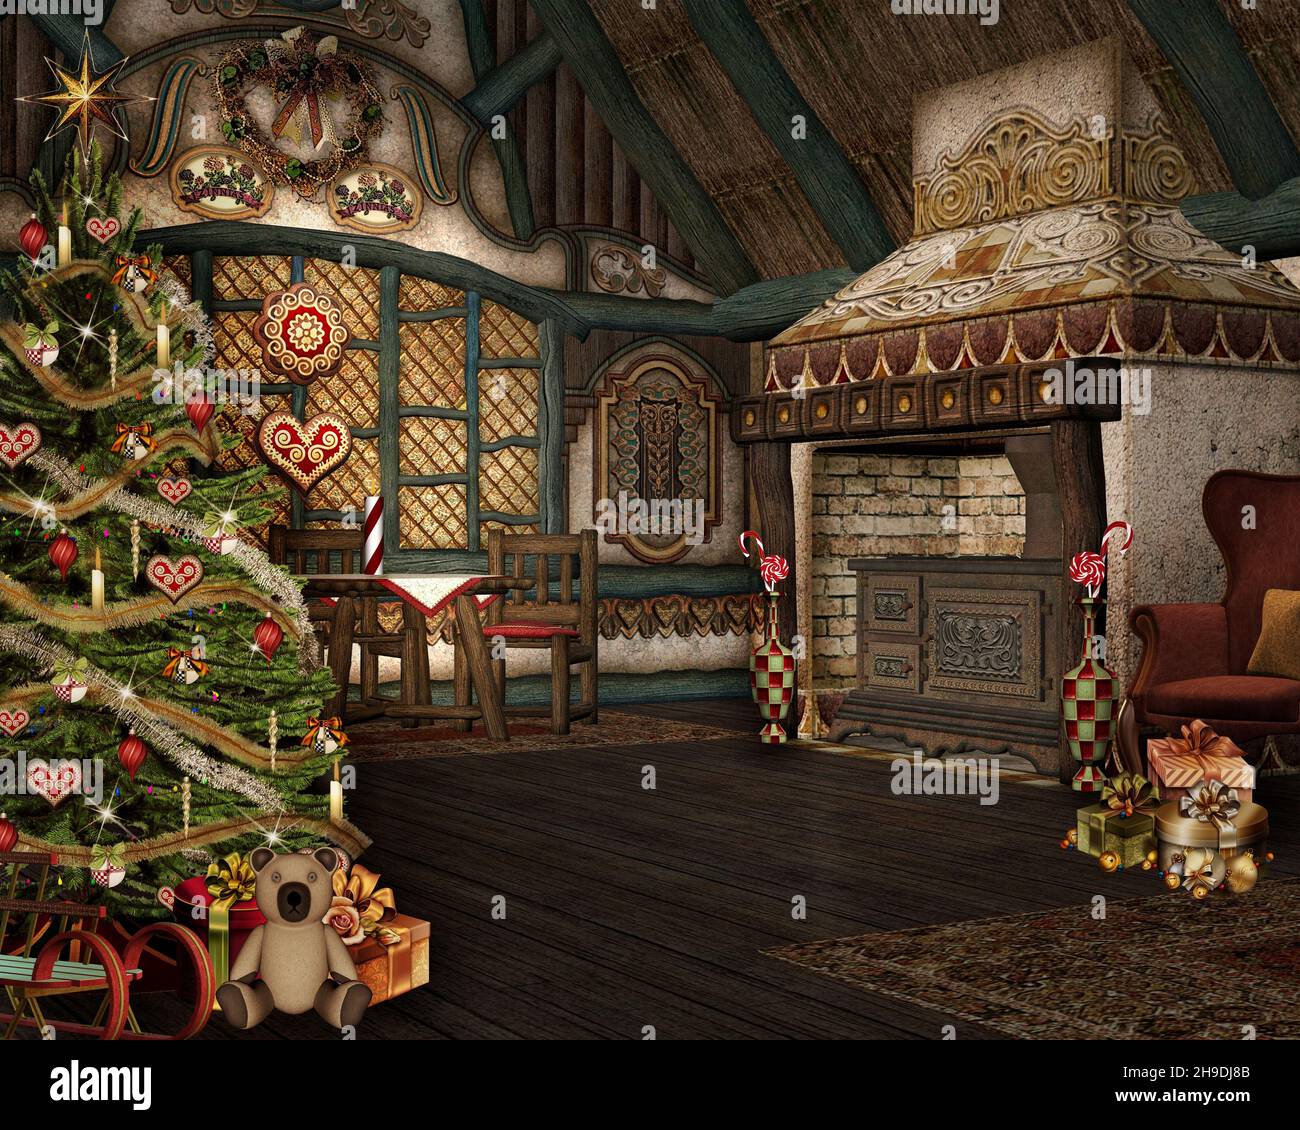 Chalet interior scene with a fully decorated christmas tree by the fireplace Stock Photo